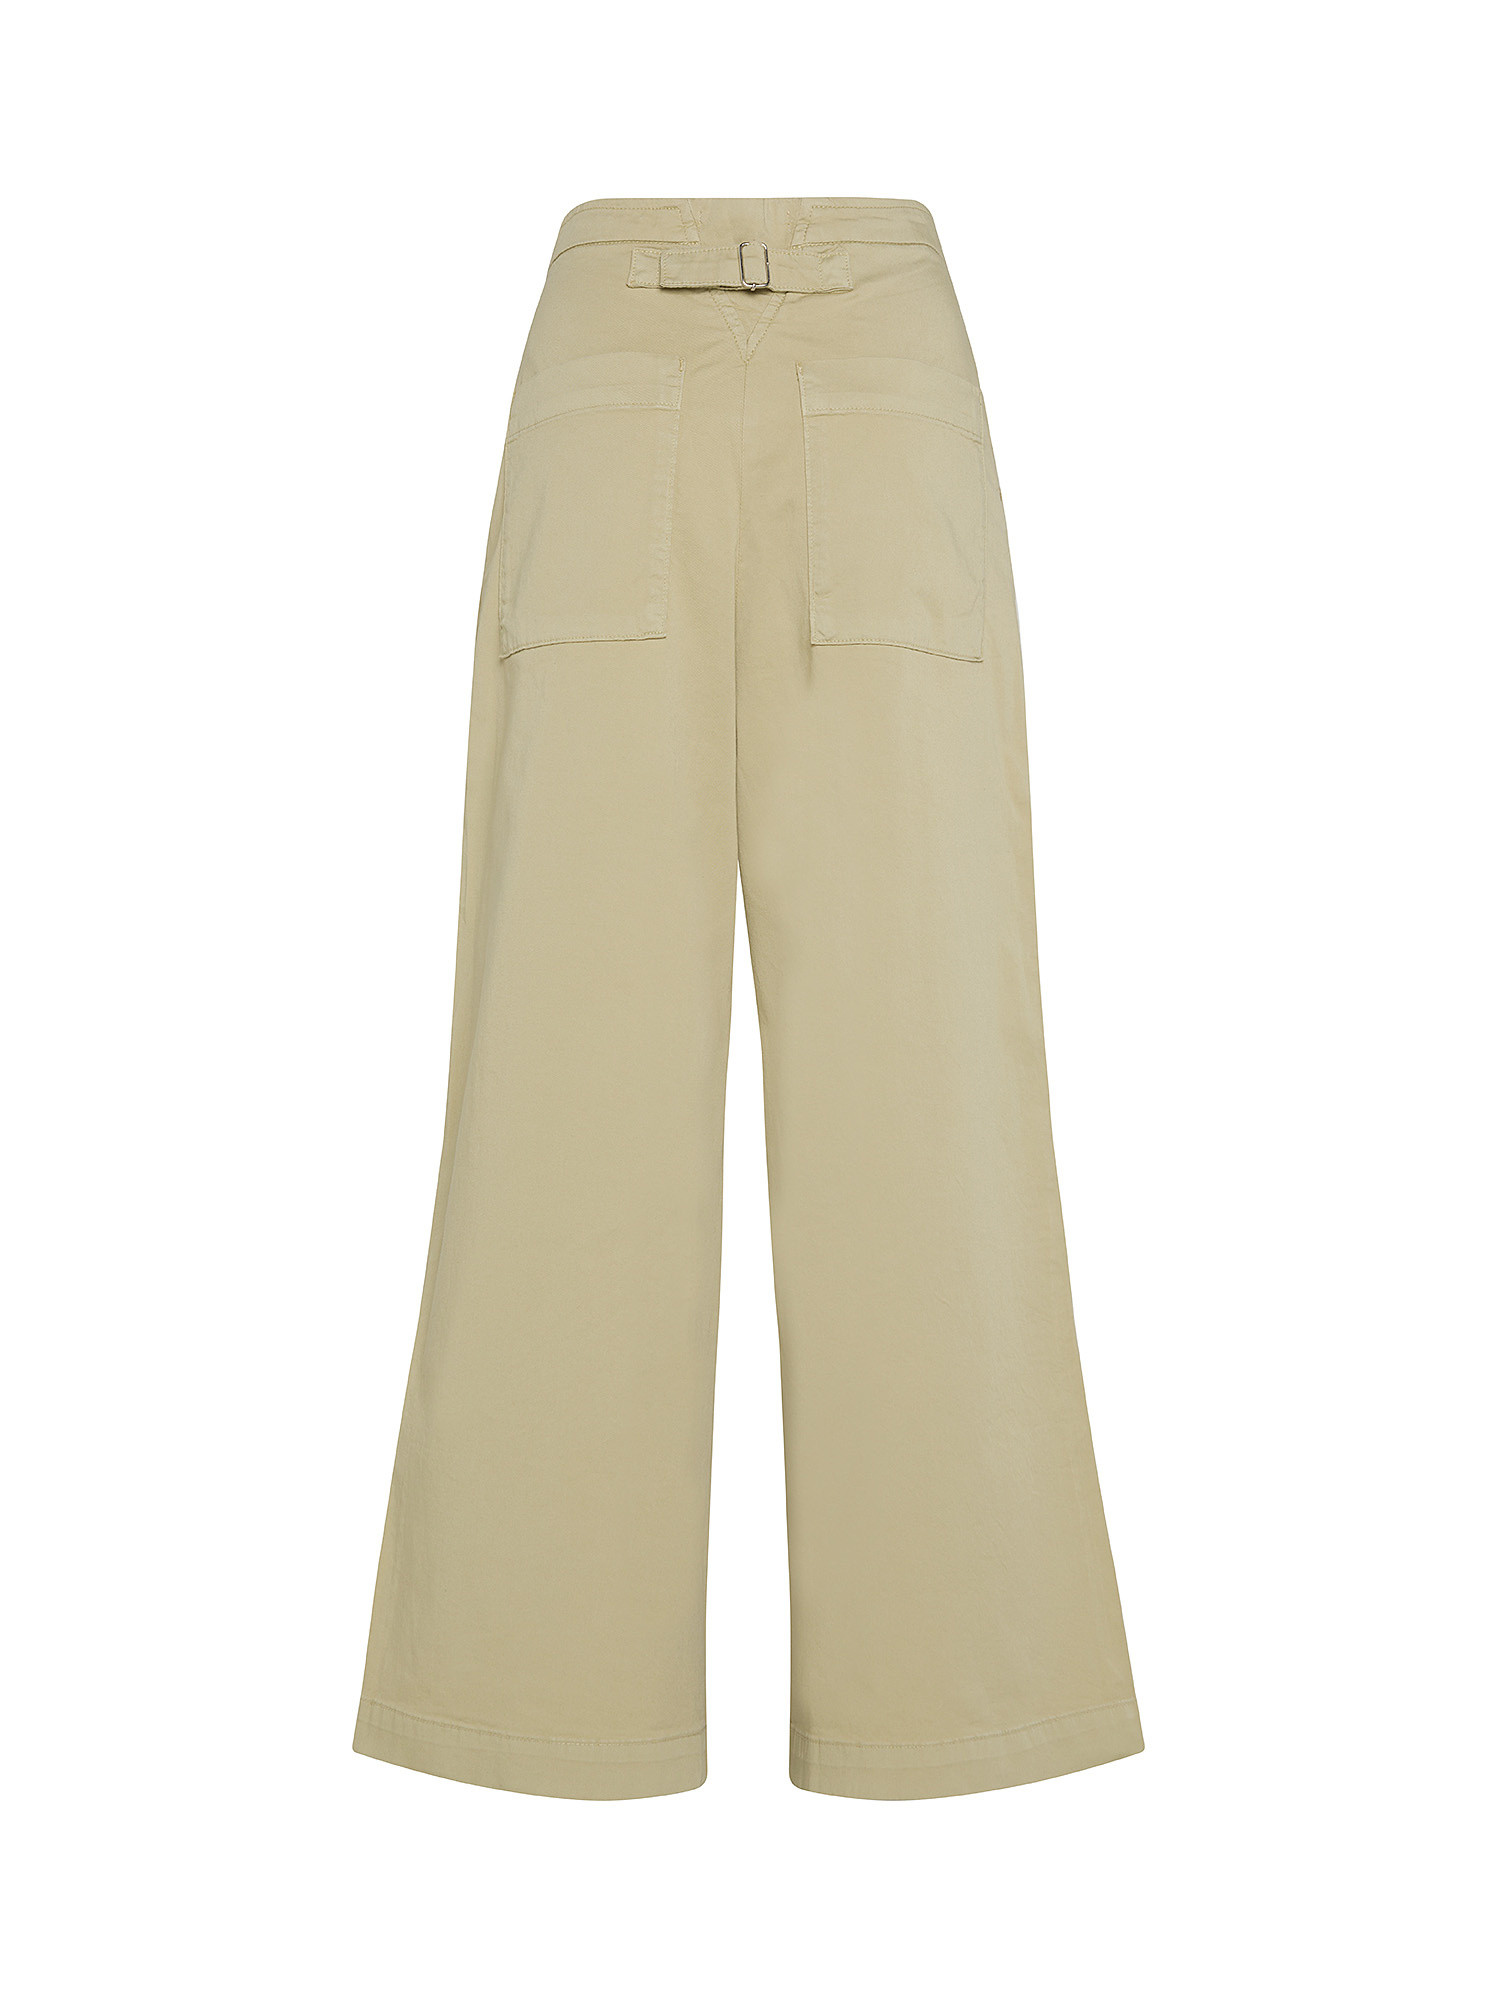 Attic and Barn - Ferdinando trousers in stretch cotton, Beige, large image number 1